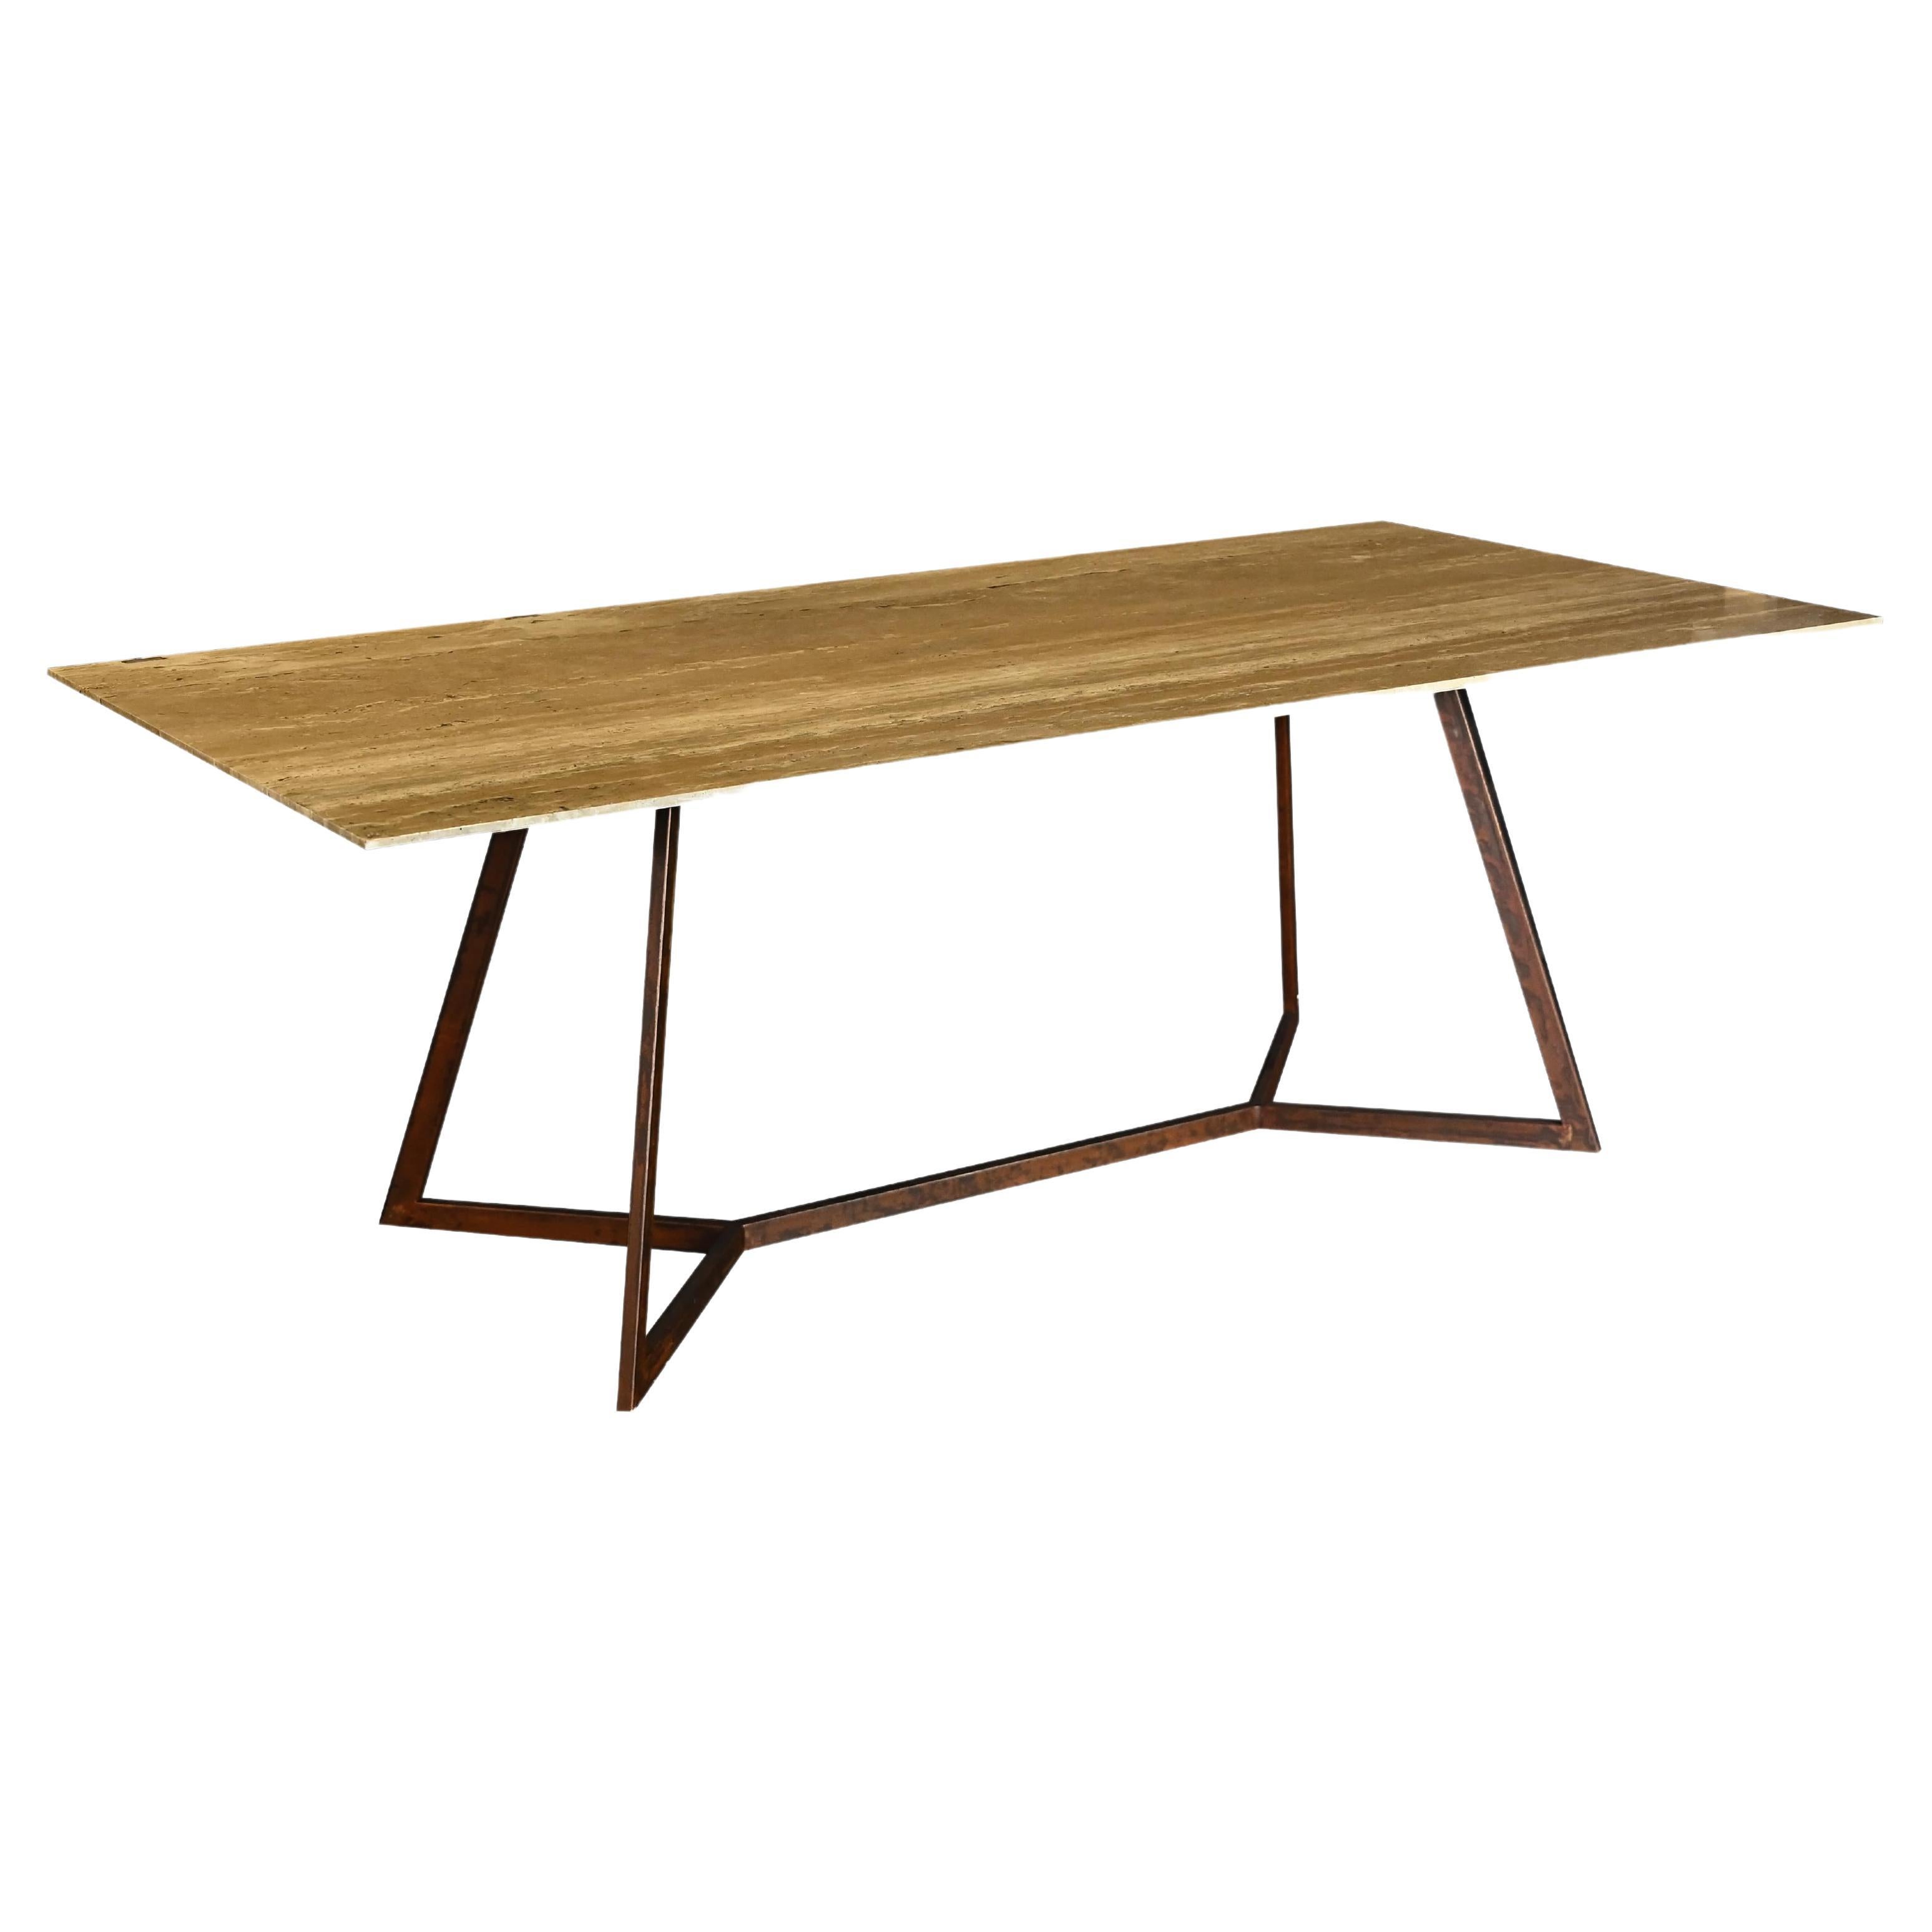 Trapeze Tr4 - Travertine Dining Table and Corten steel By DFdesignlab 